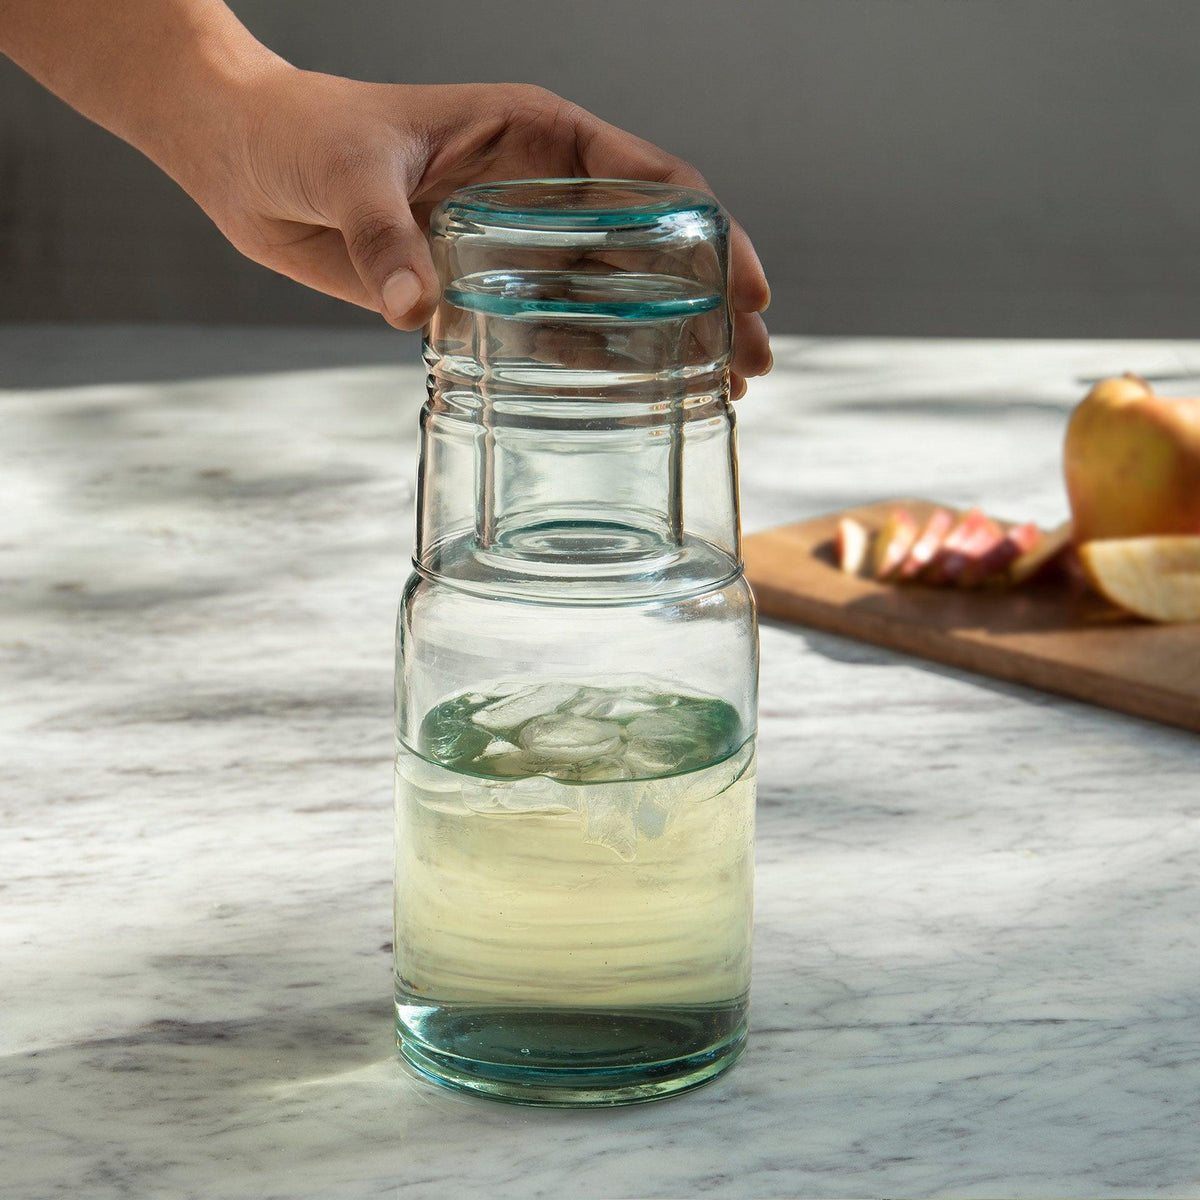 Jove Blue Carafe with Tumbler - ellementry